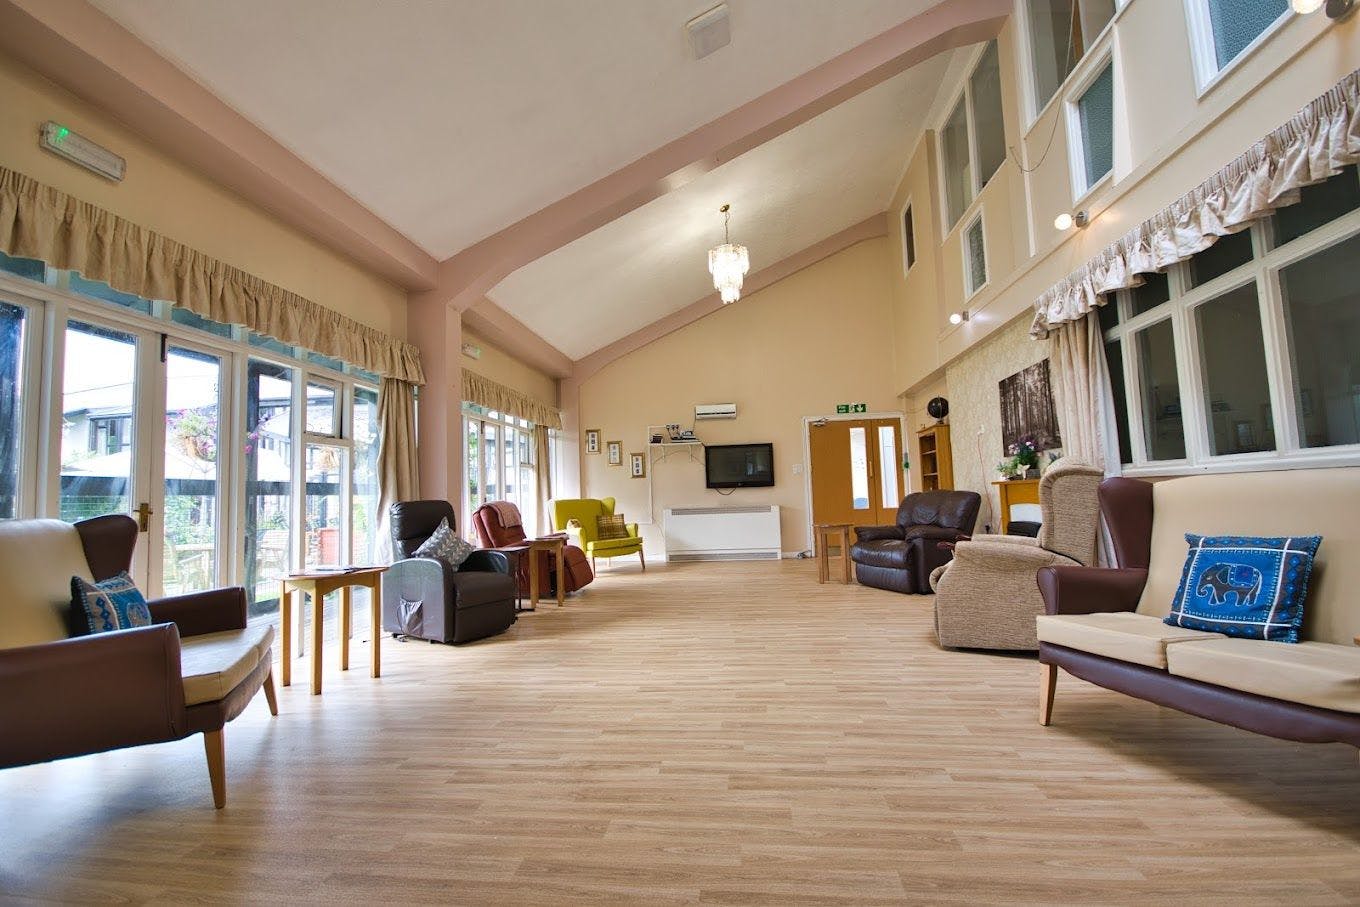 Communal Area at Elburton Heights Care Home in Plymouth, Devon